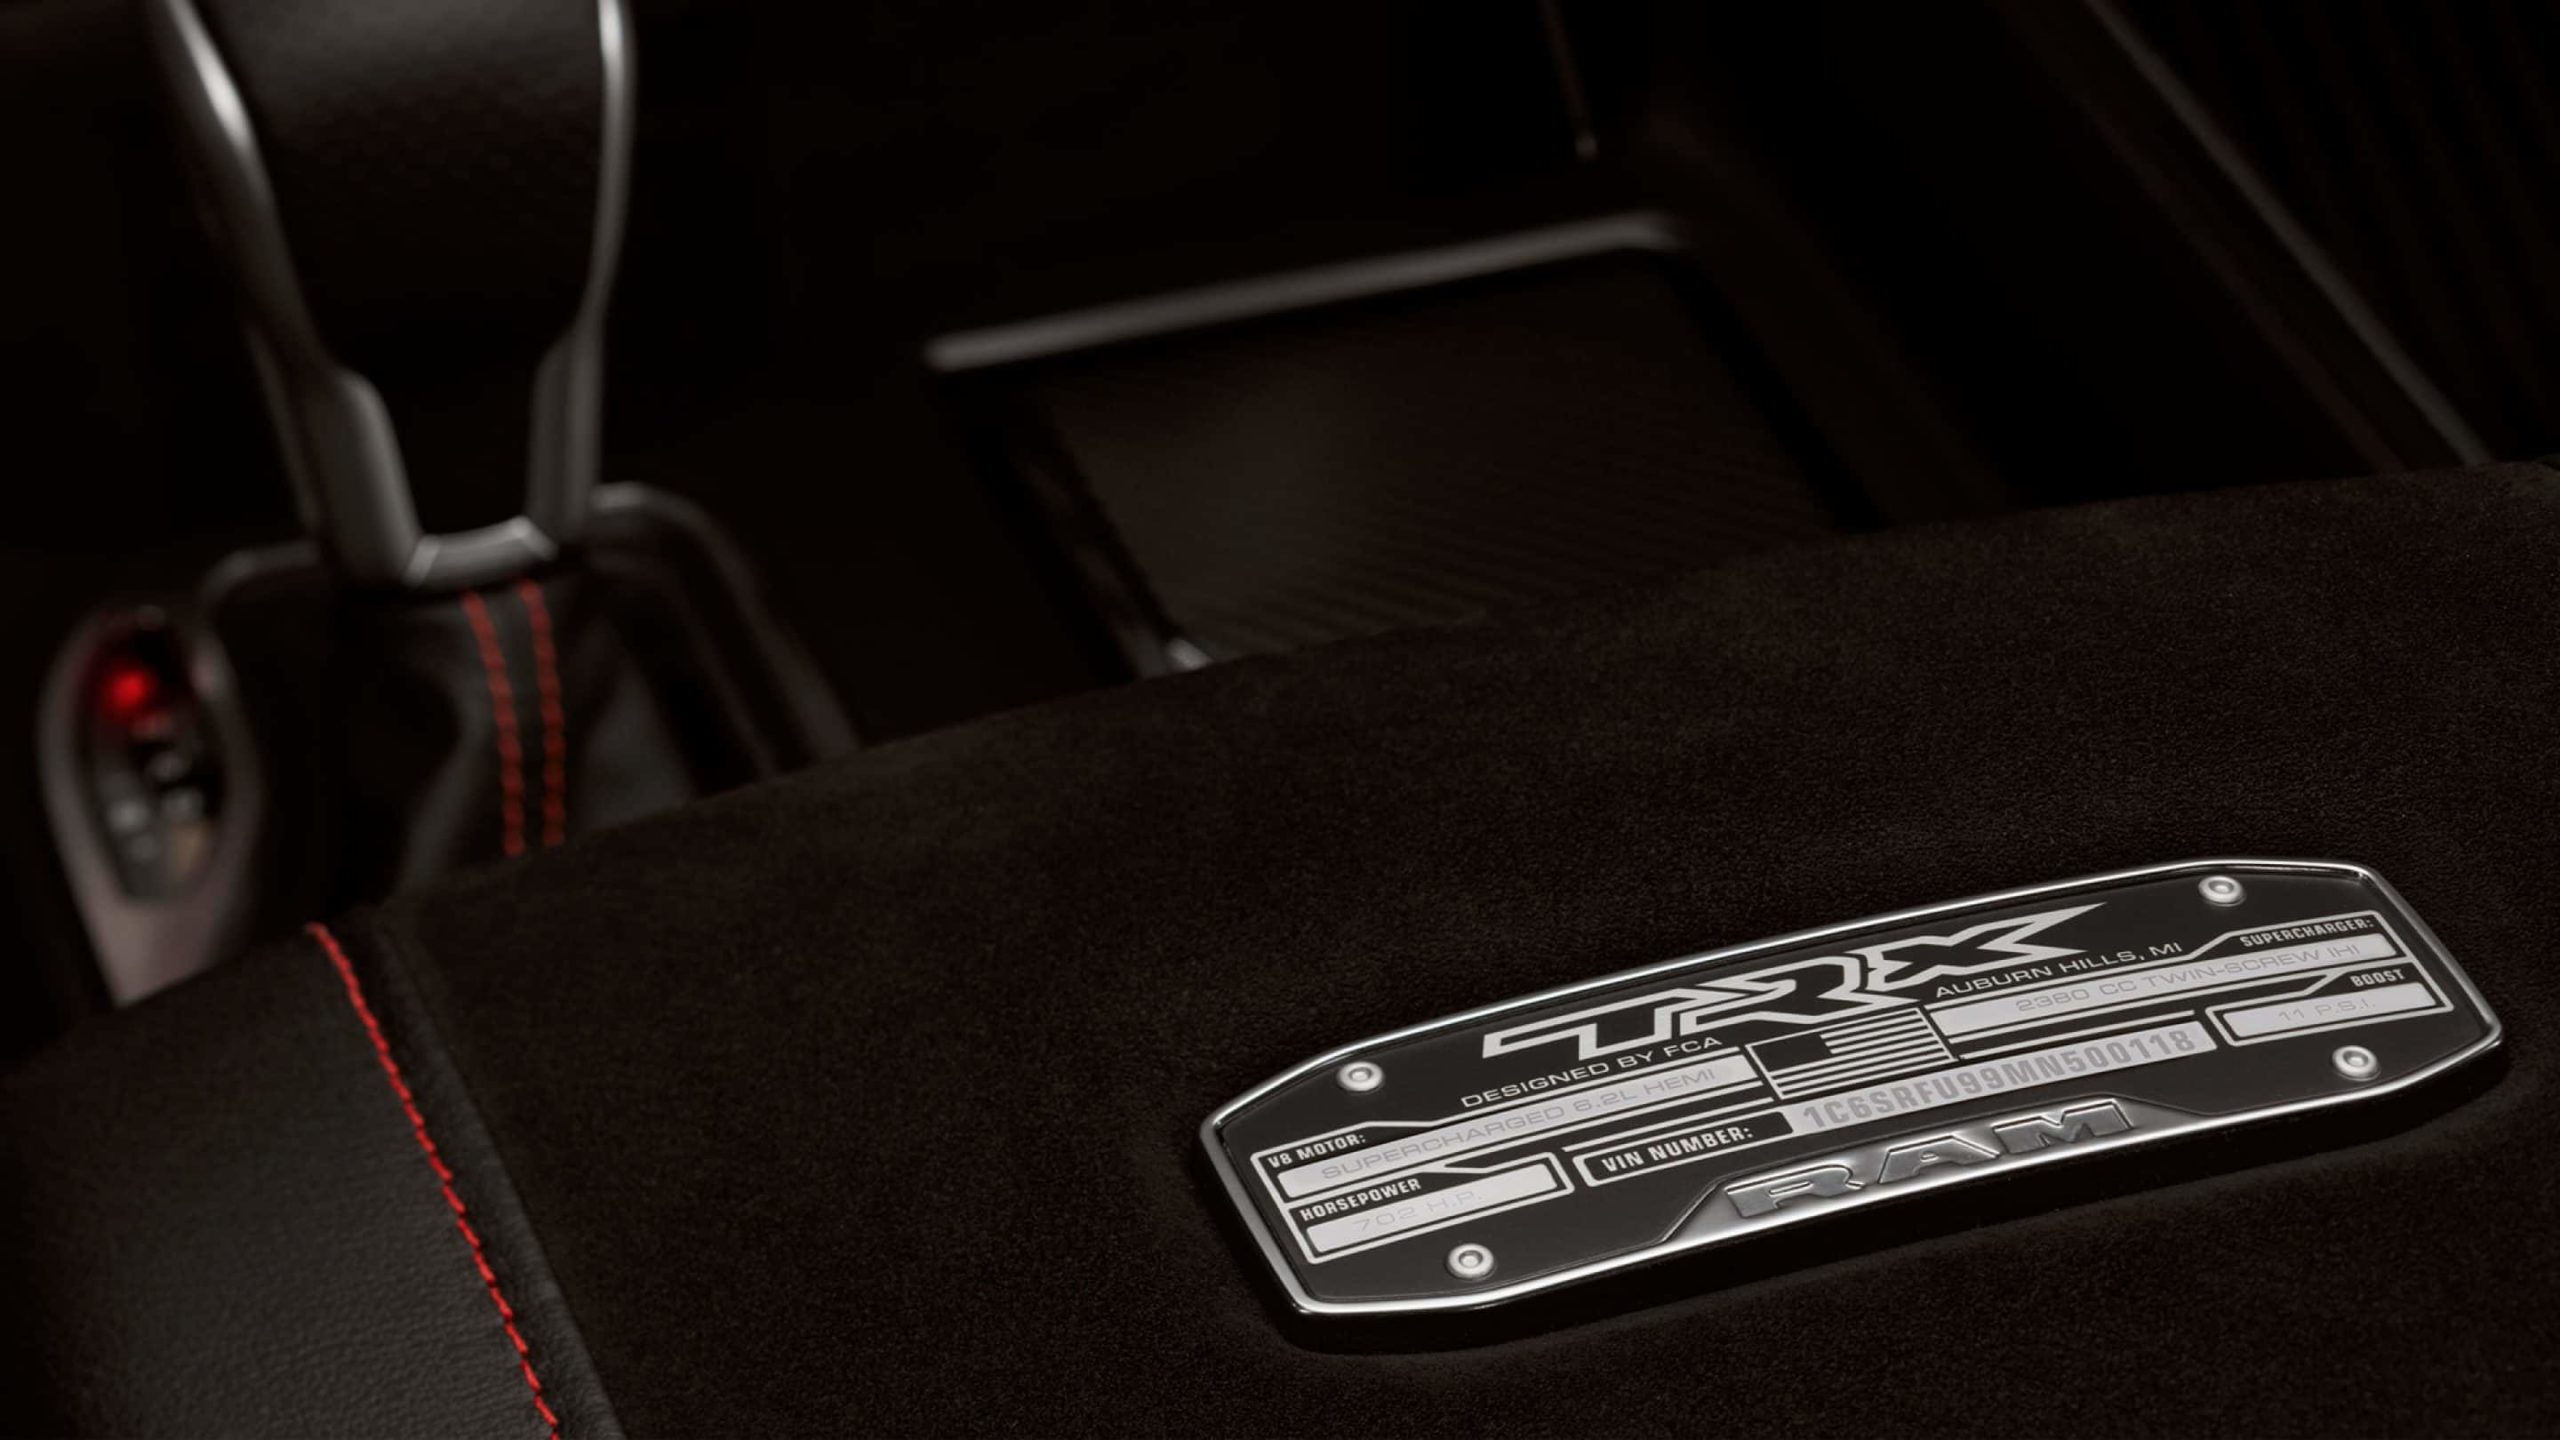 The 2021 Ram 1500 TRX features an elevated interior with details like a console armrest-positioned specification plate that displays stats like horsepower, PSI and the Vehicle Identification Number (VIN) that is unique to each TRX.